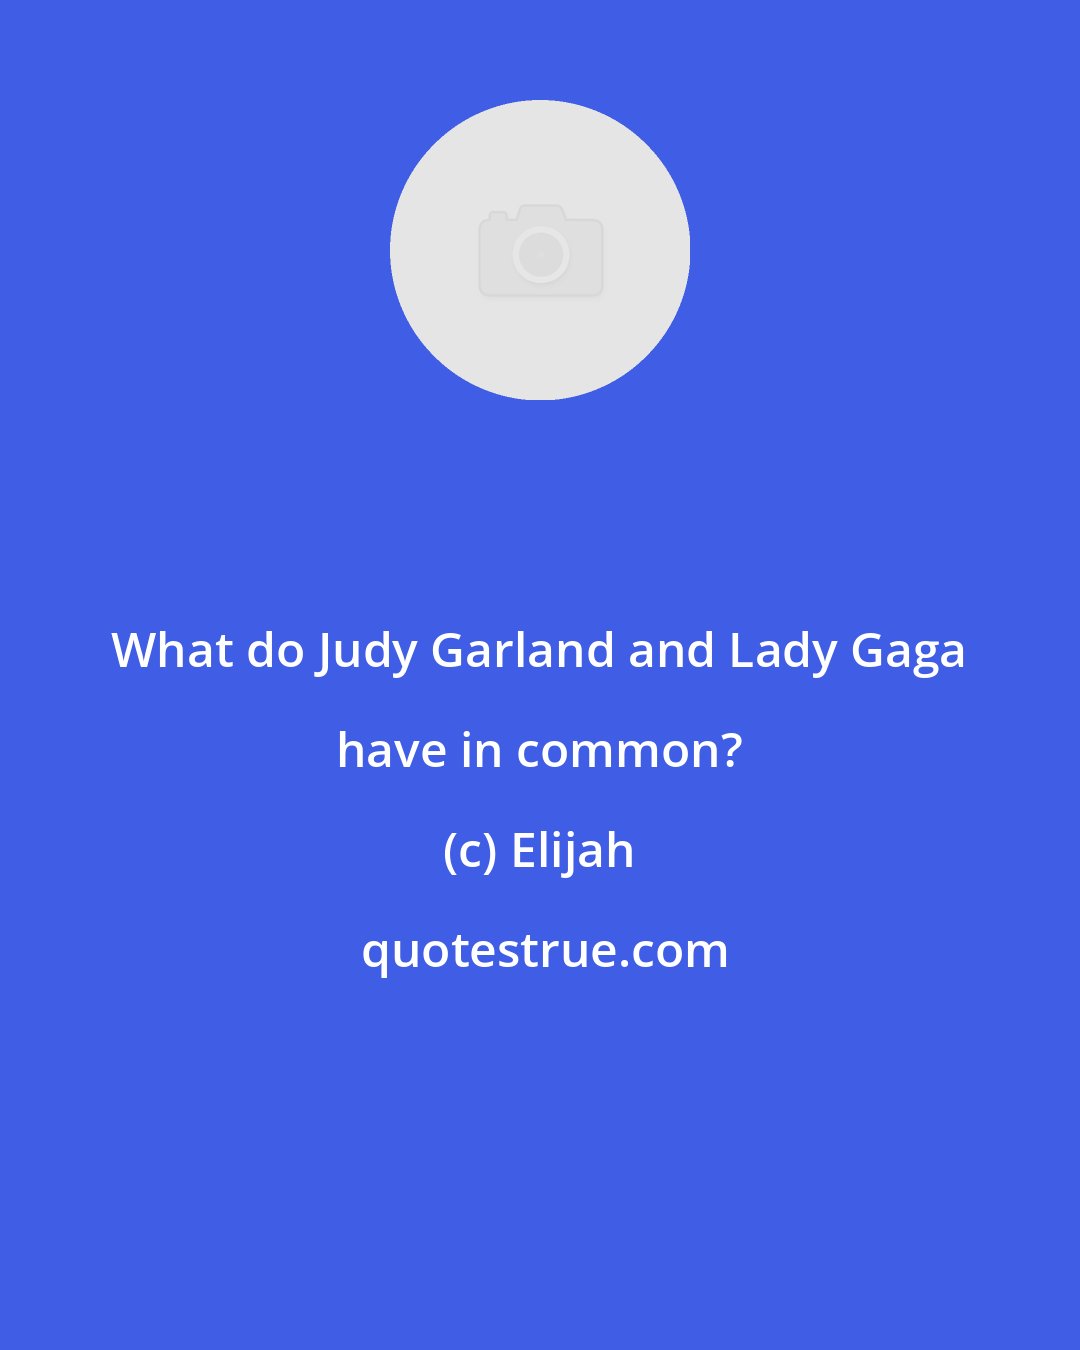 Elijah: What do Judy Garland and Lady Gaga have in common?